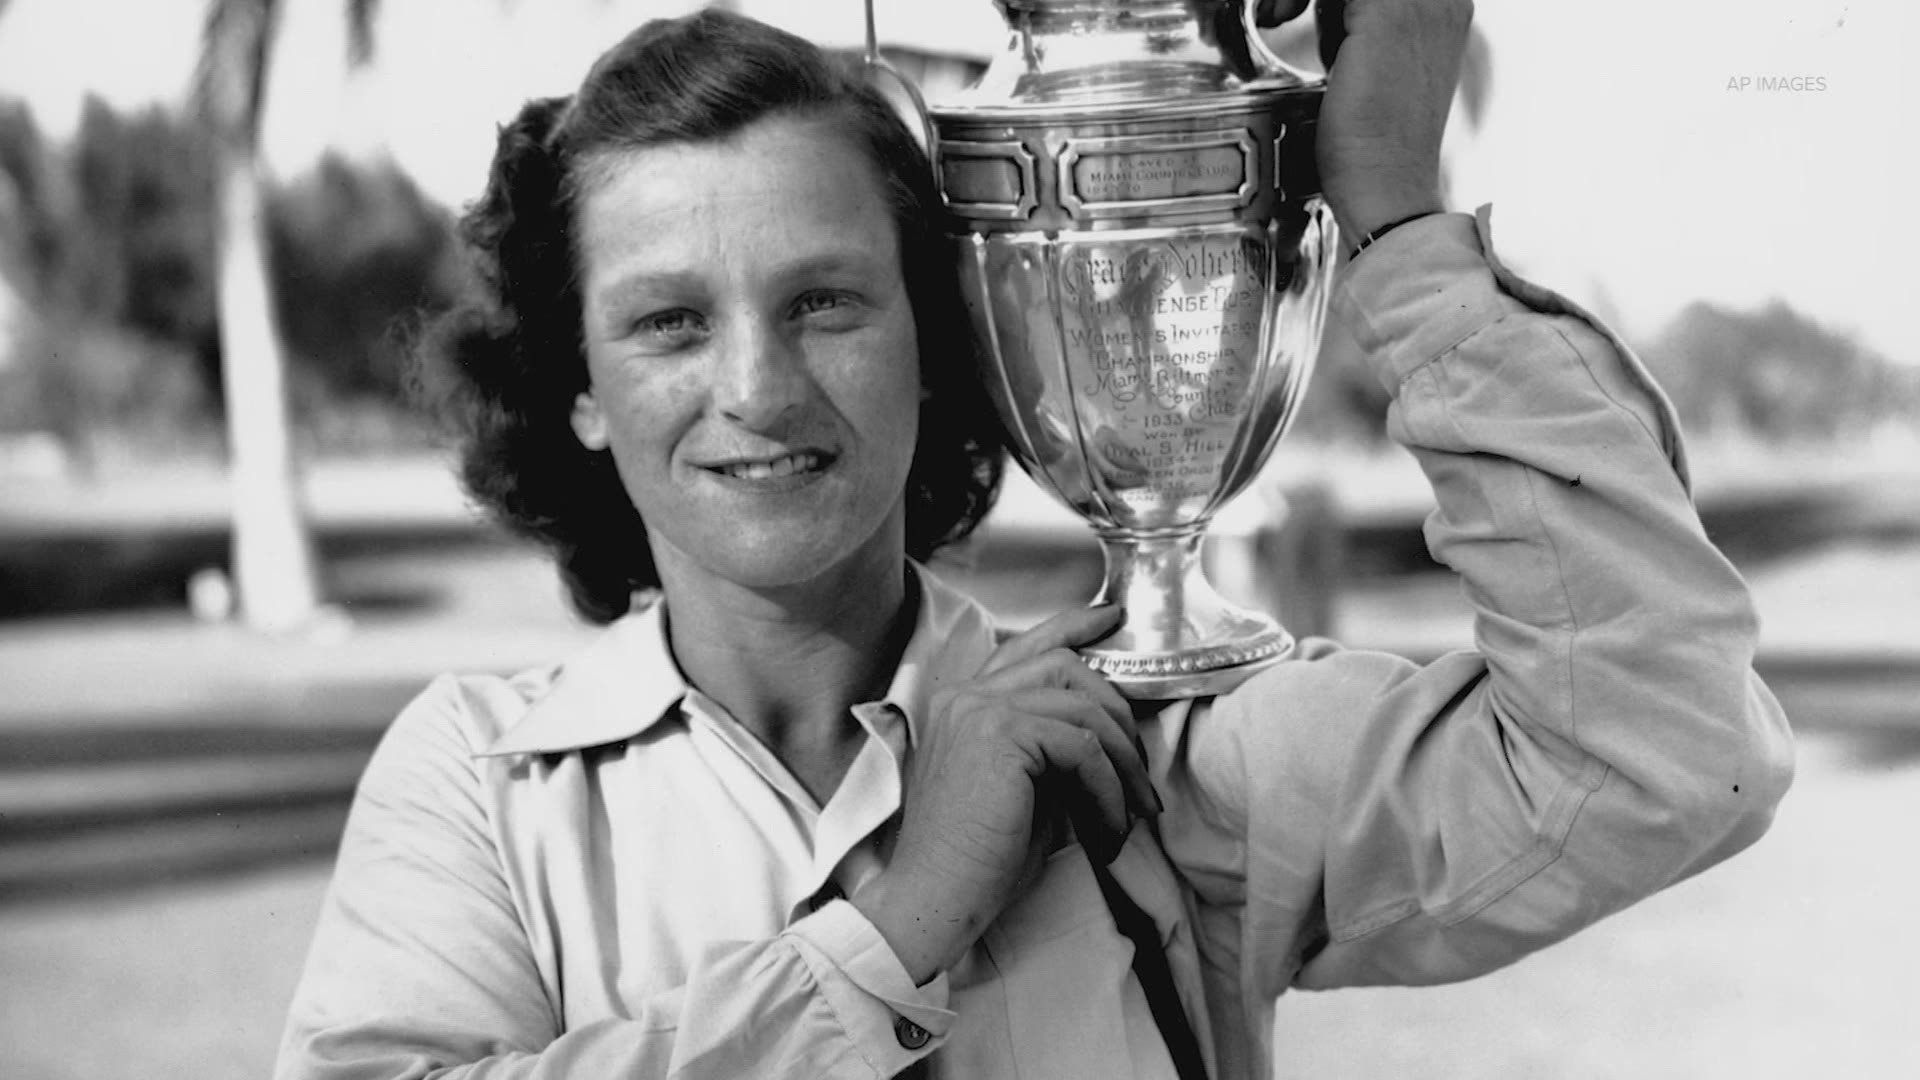 No talk about women's sports trailblazers is complete without naming one of the nation's most accomplished and diversely talented athletes, Babe Zaharias.